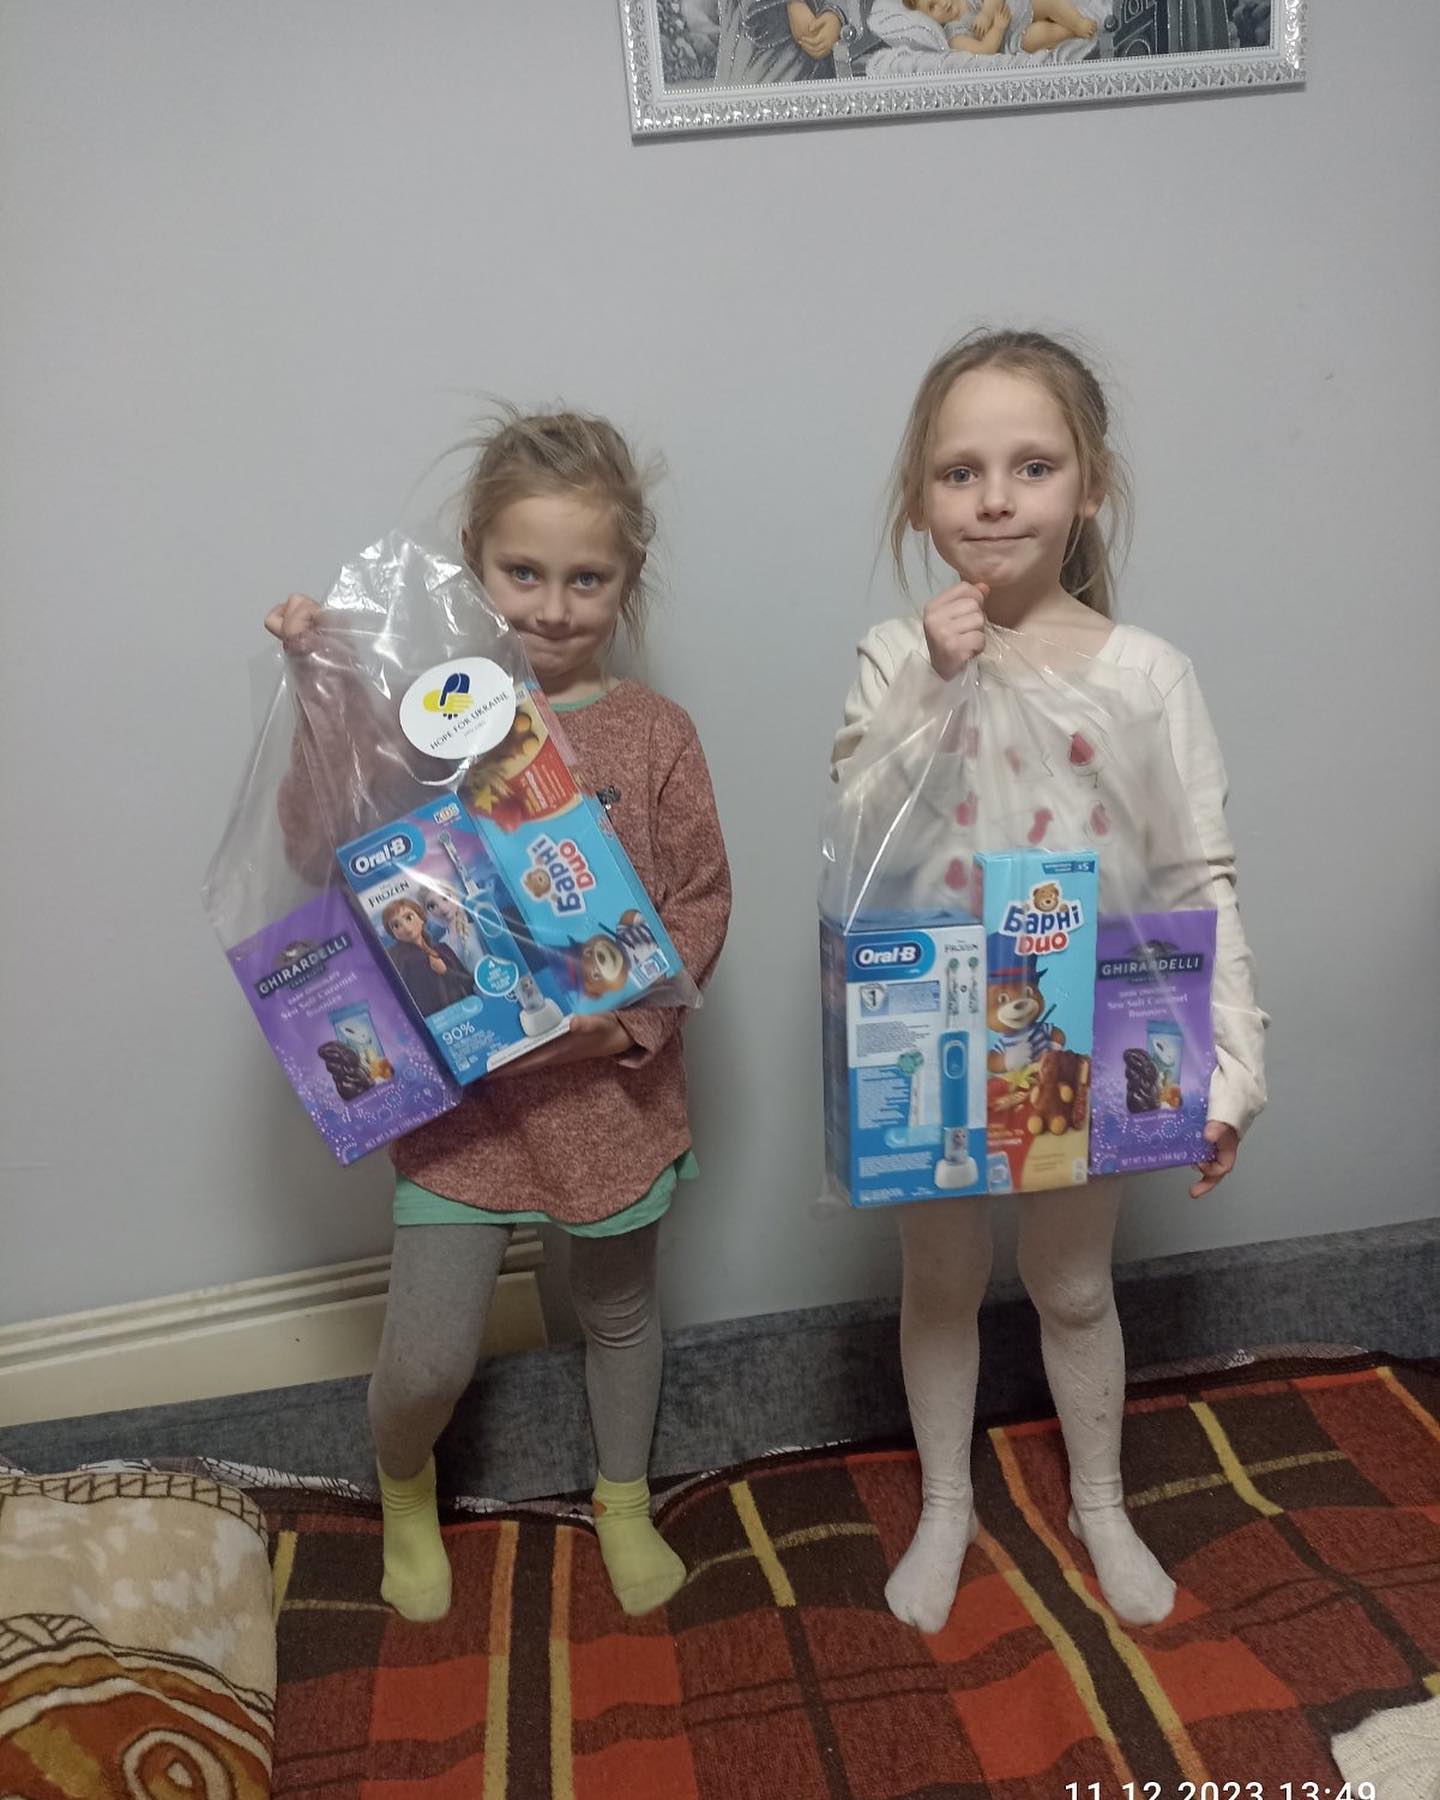 Two young girls holding bags of food and toys.